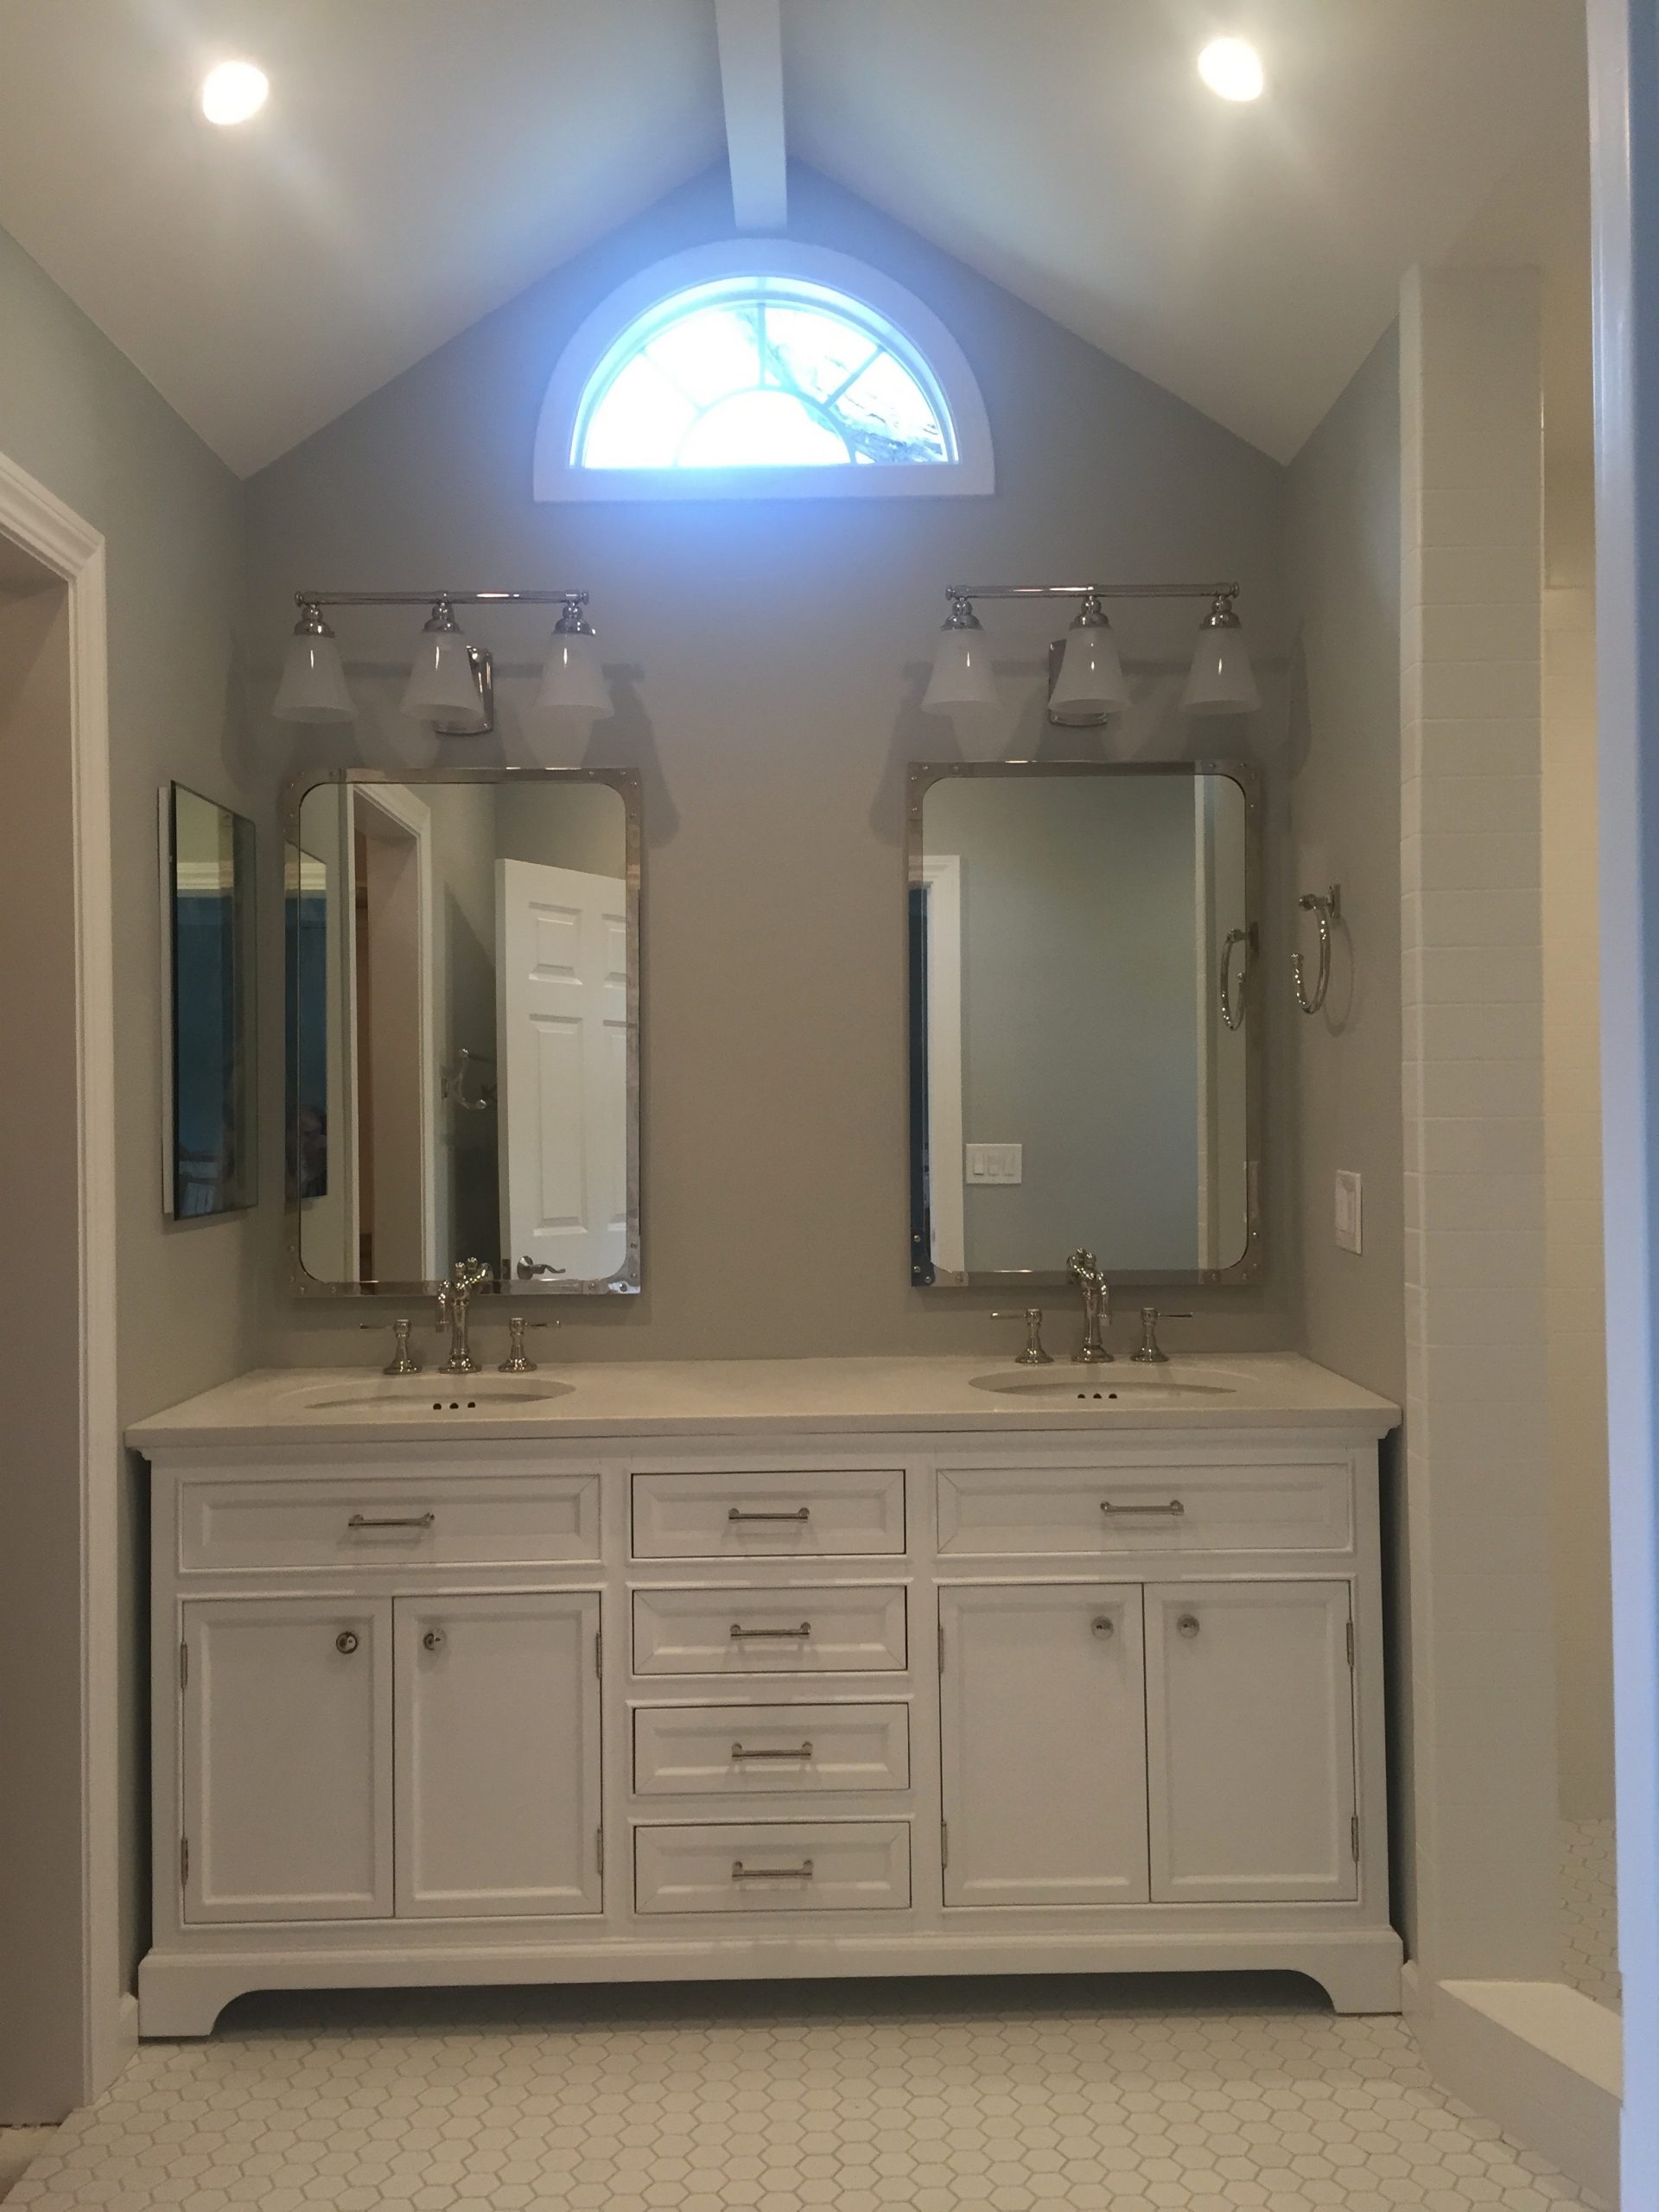 1980’s bathroom gets a major makeover with vaulted ceilings and new windows